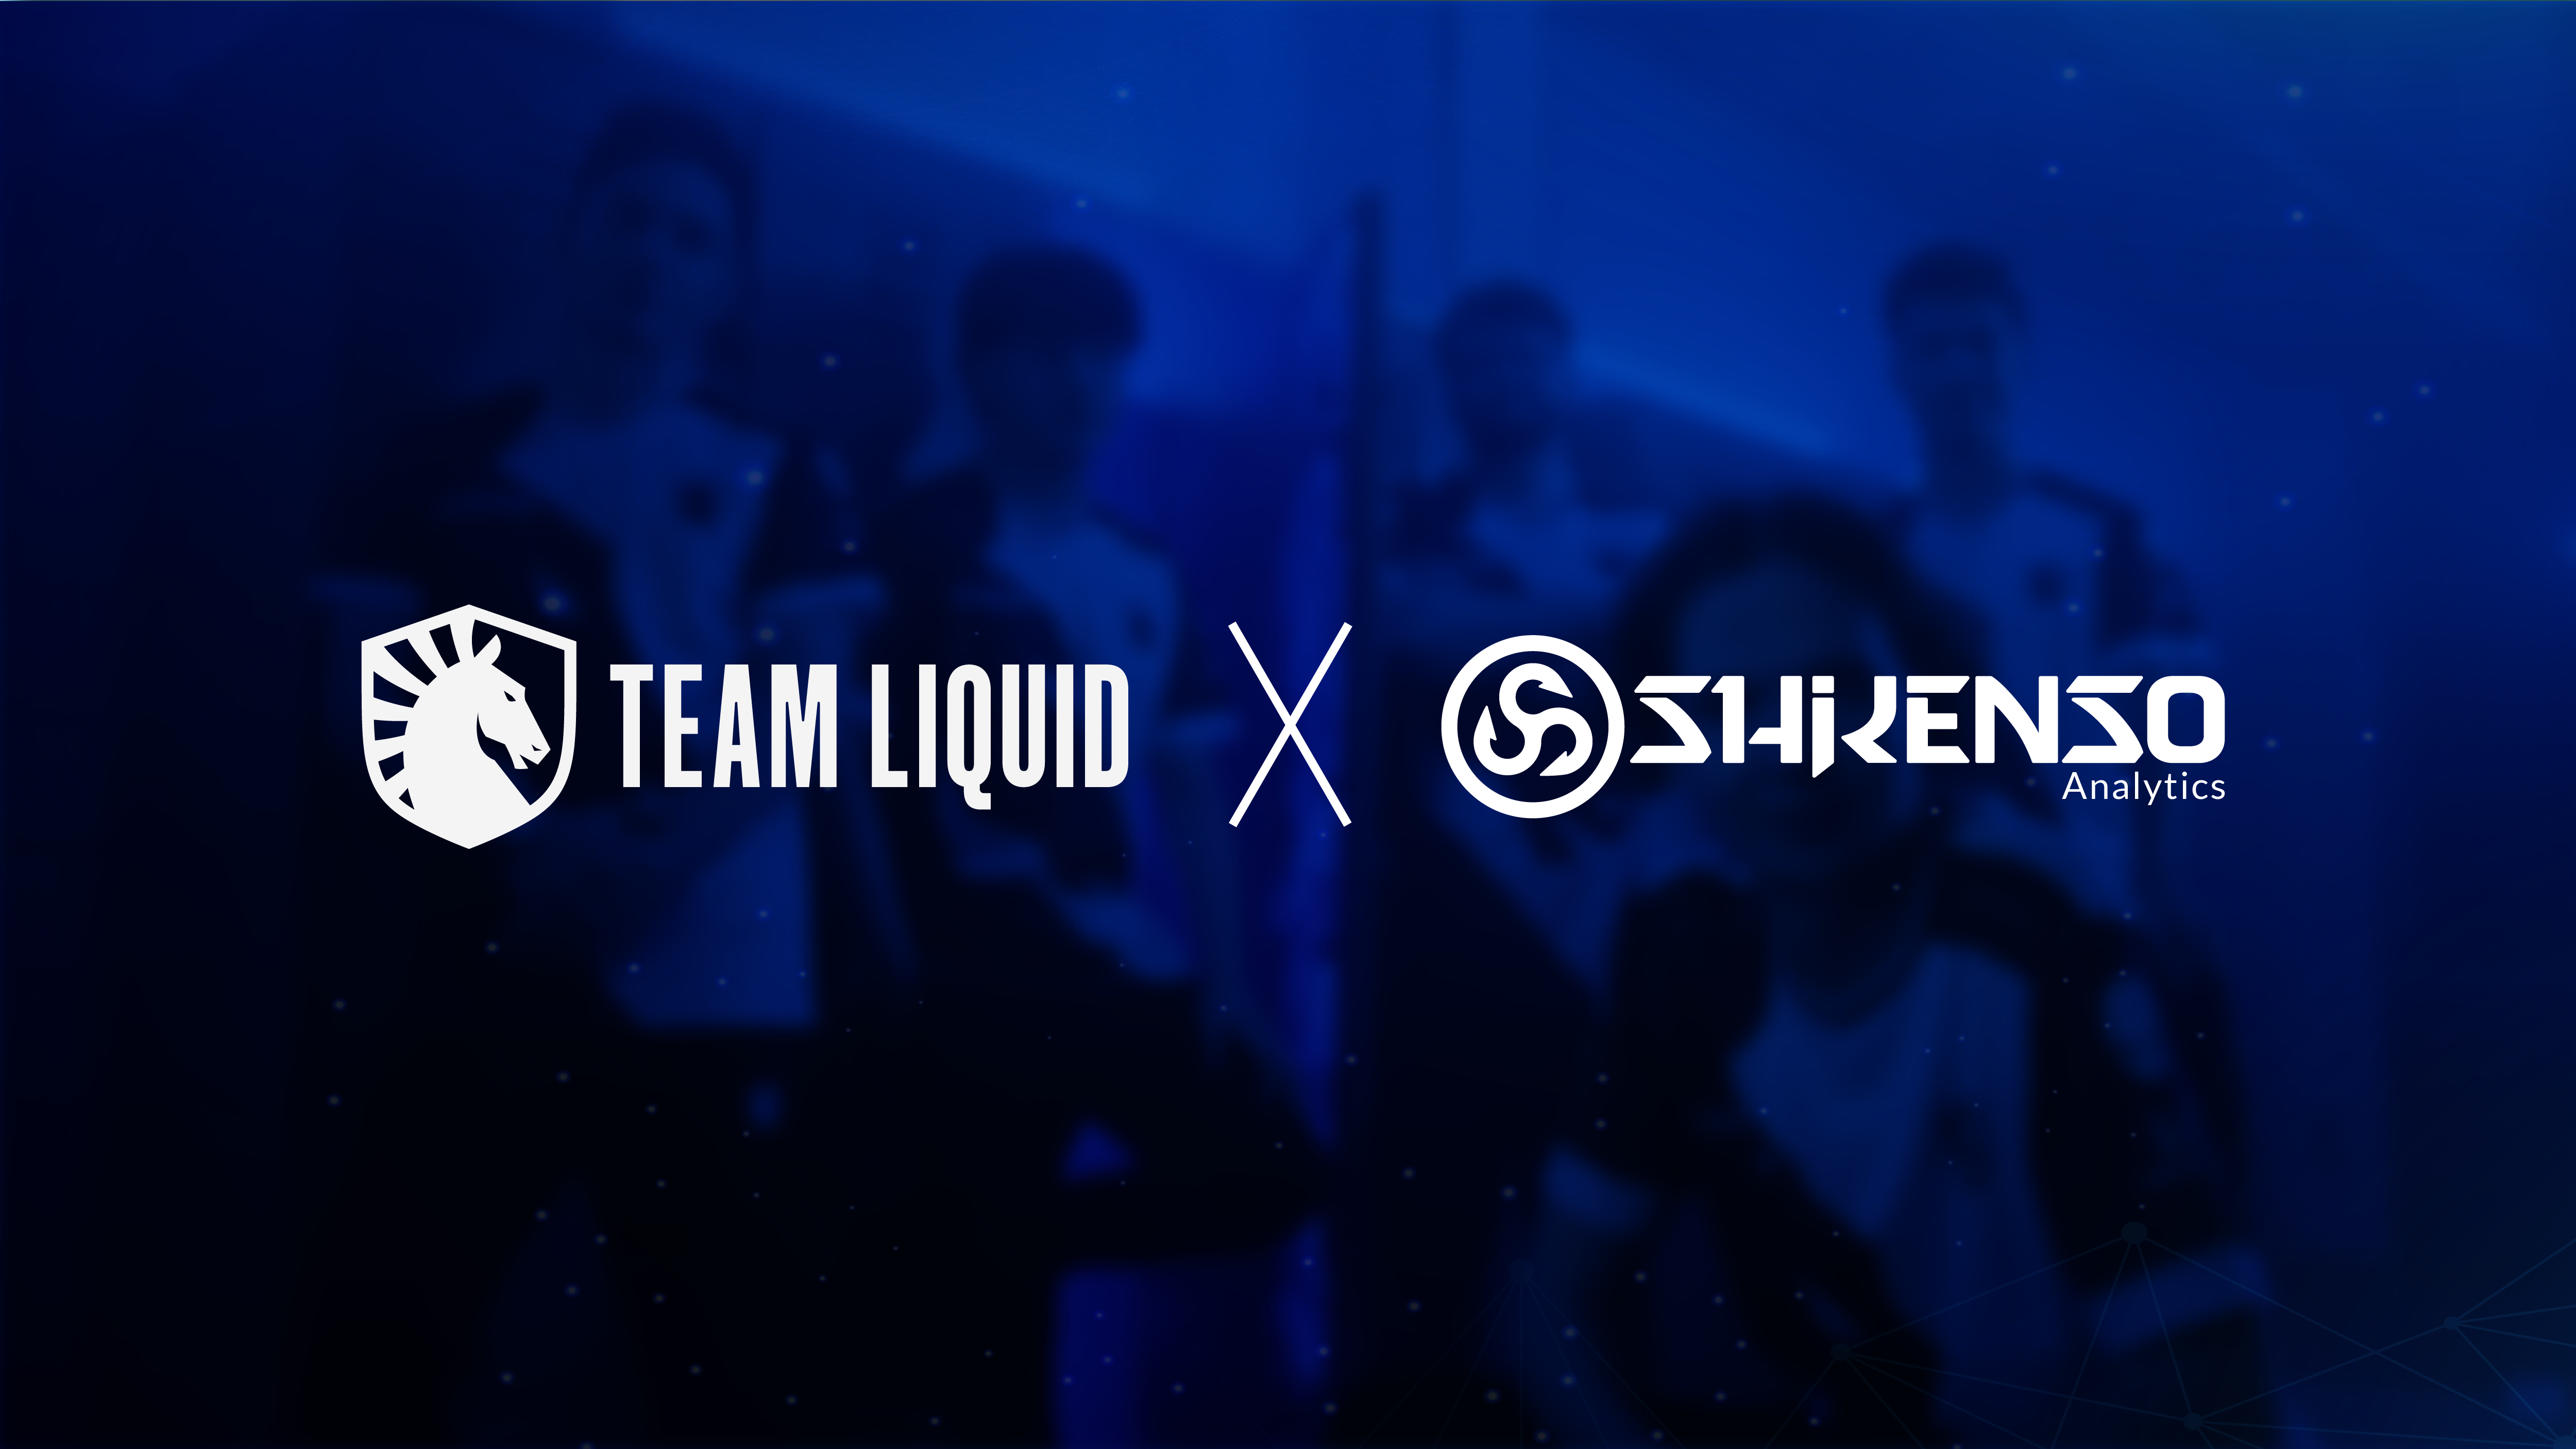 Team Liquid enters a strategic data partnership with Shikenso Analytics, leveraging cutting-edge AI solutions to elevate performance metrics